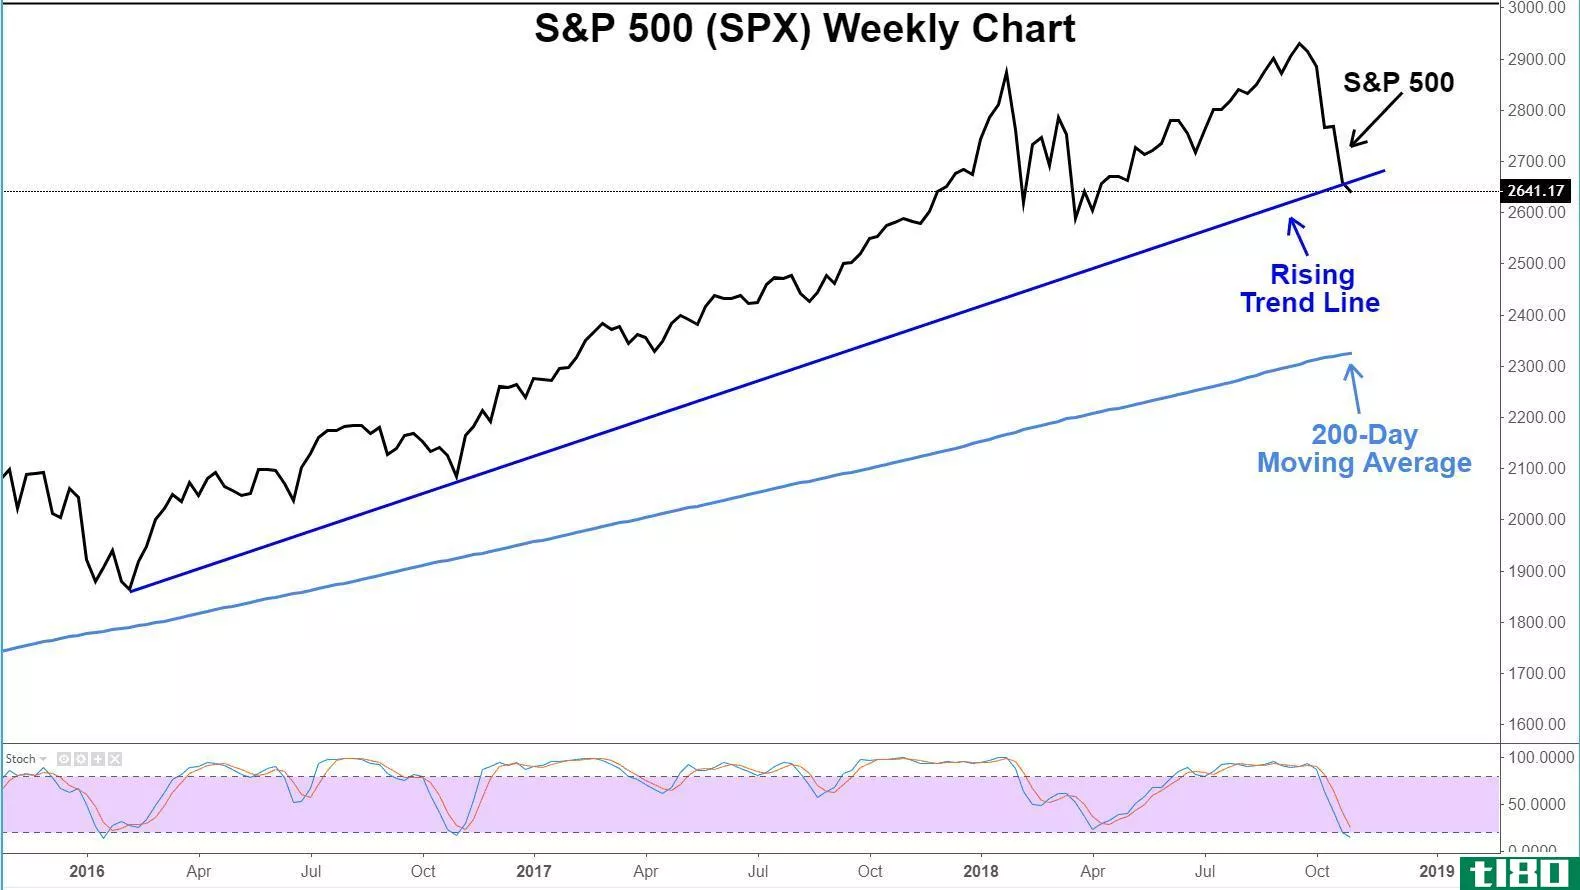 Chart showing the performance of the S&P 500 index